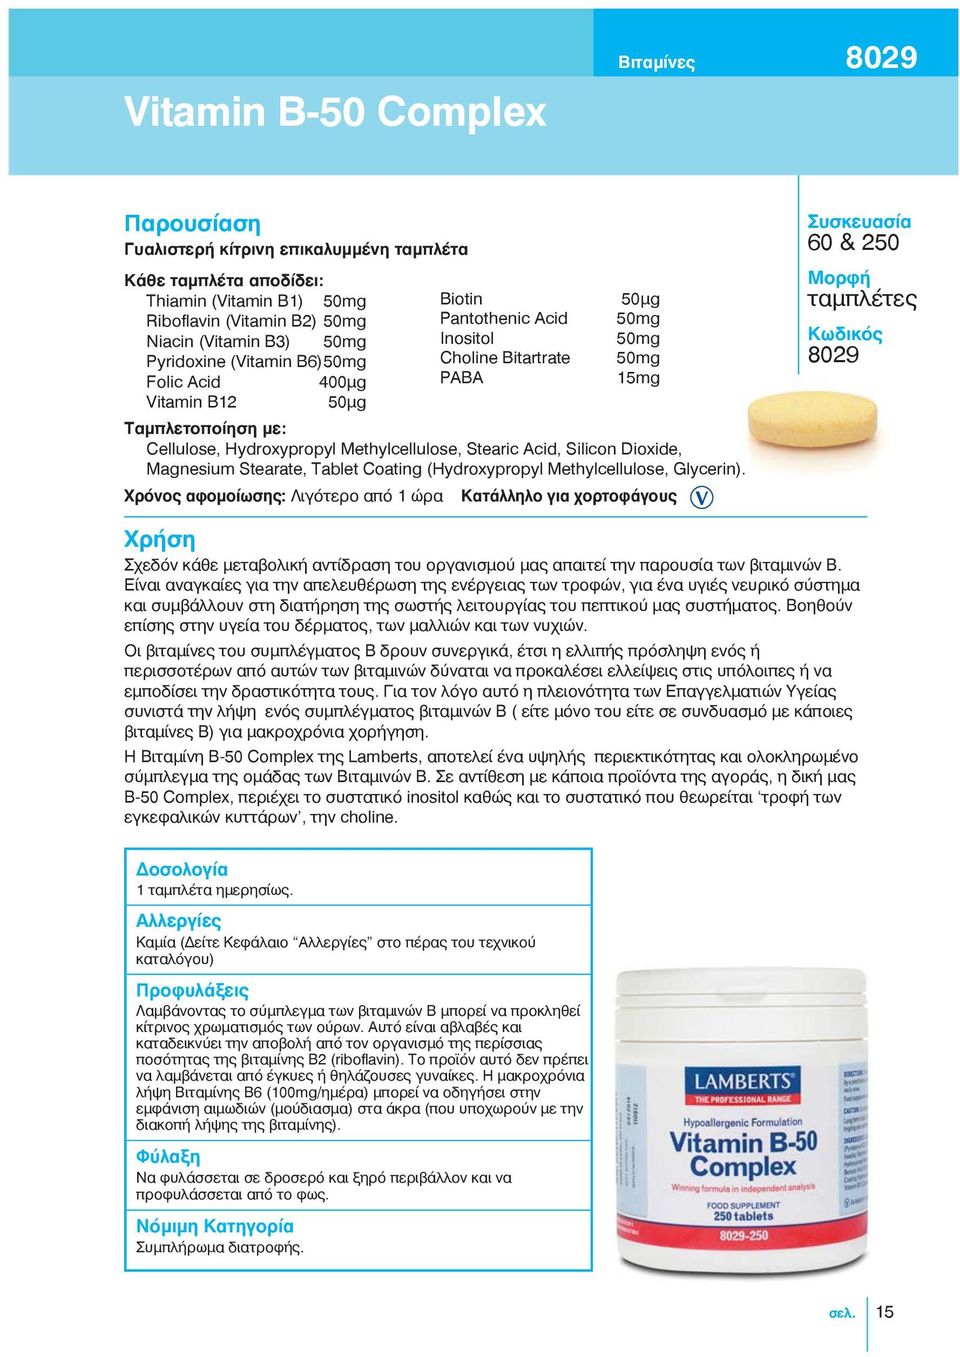 Acid, Silicon Dioxide, Magnesium Stearate, Tablet Coating (Hydroxypropyl Methylcellulose, Glycerin).